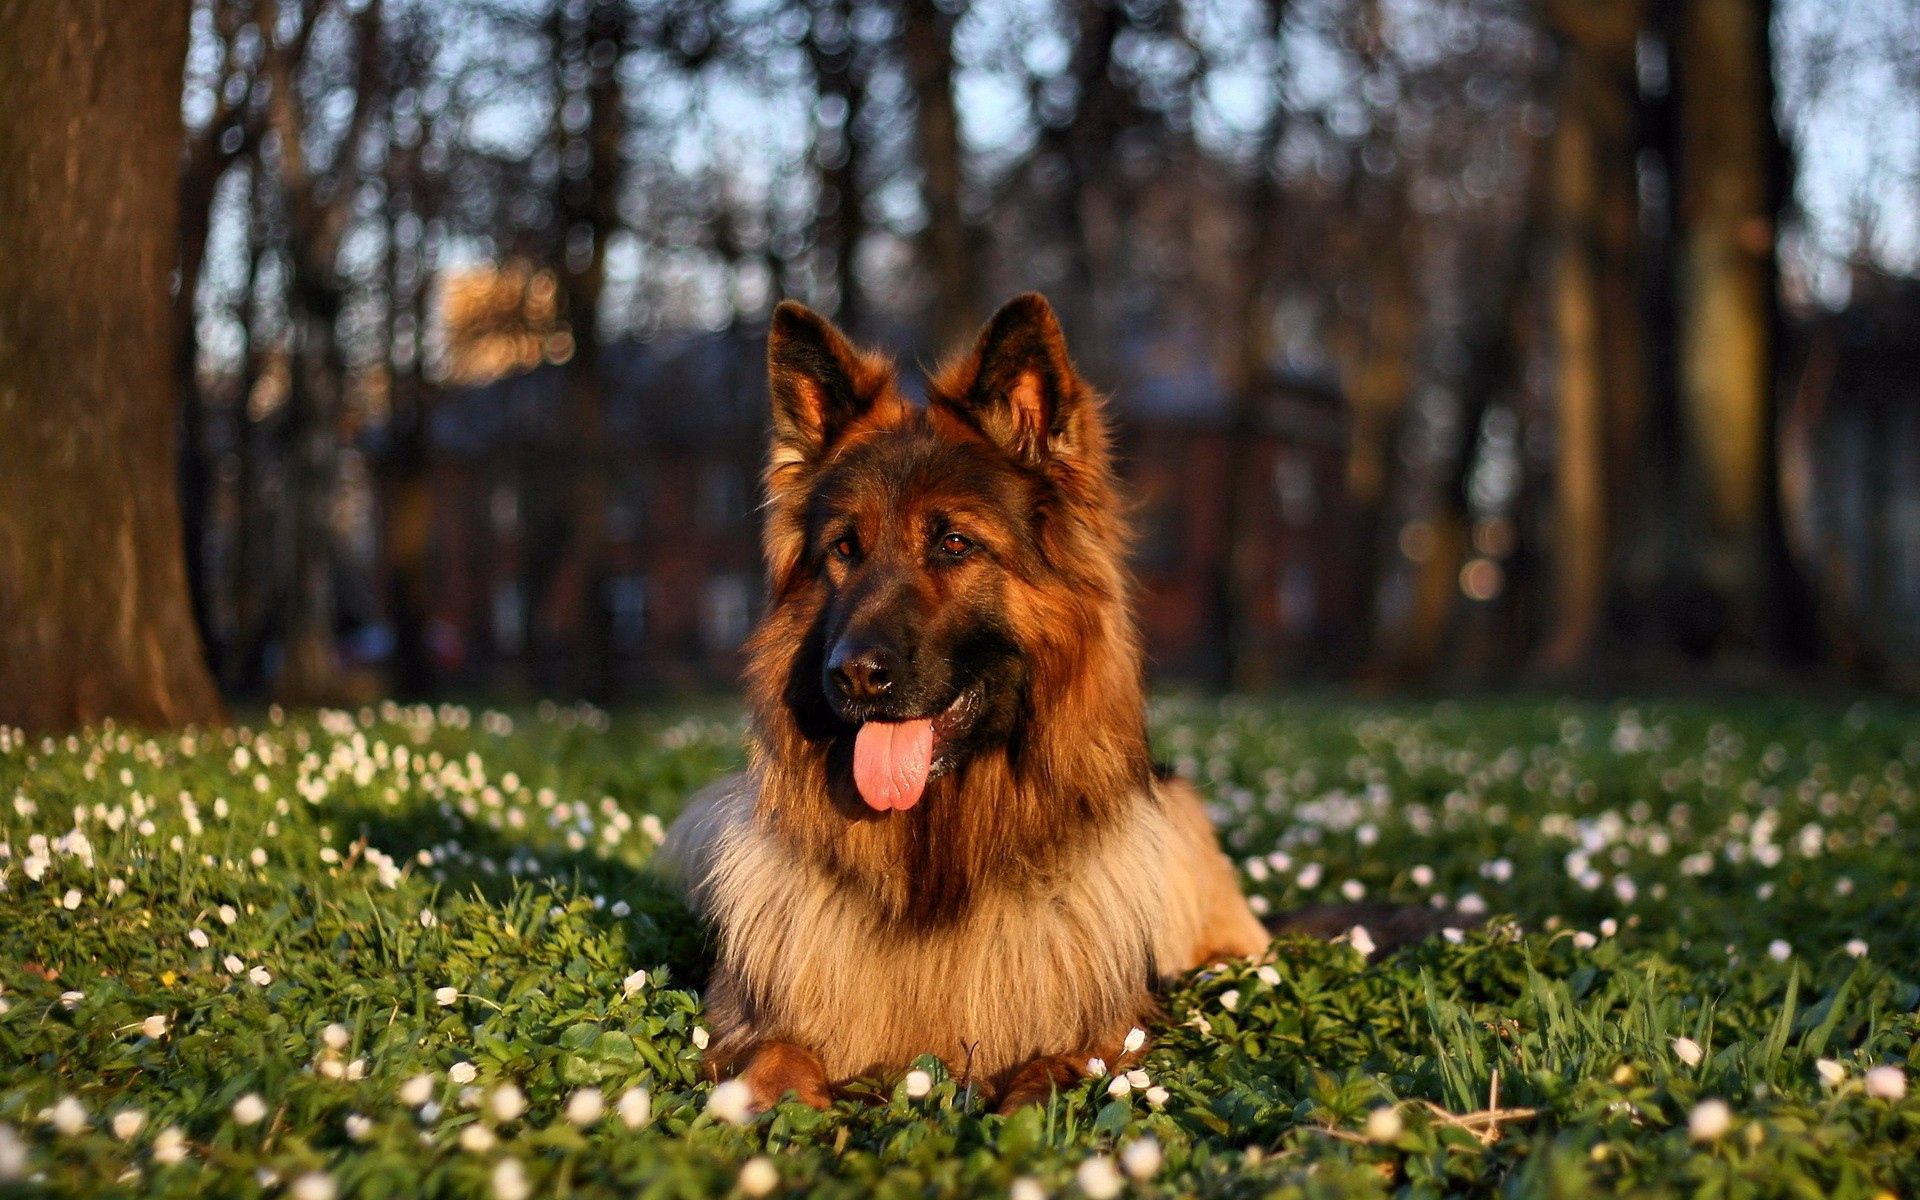 146756 download wallpaper animals, grass, sit, dog, protruding tongue, tongue stuck out screensavers and pictures for free